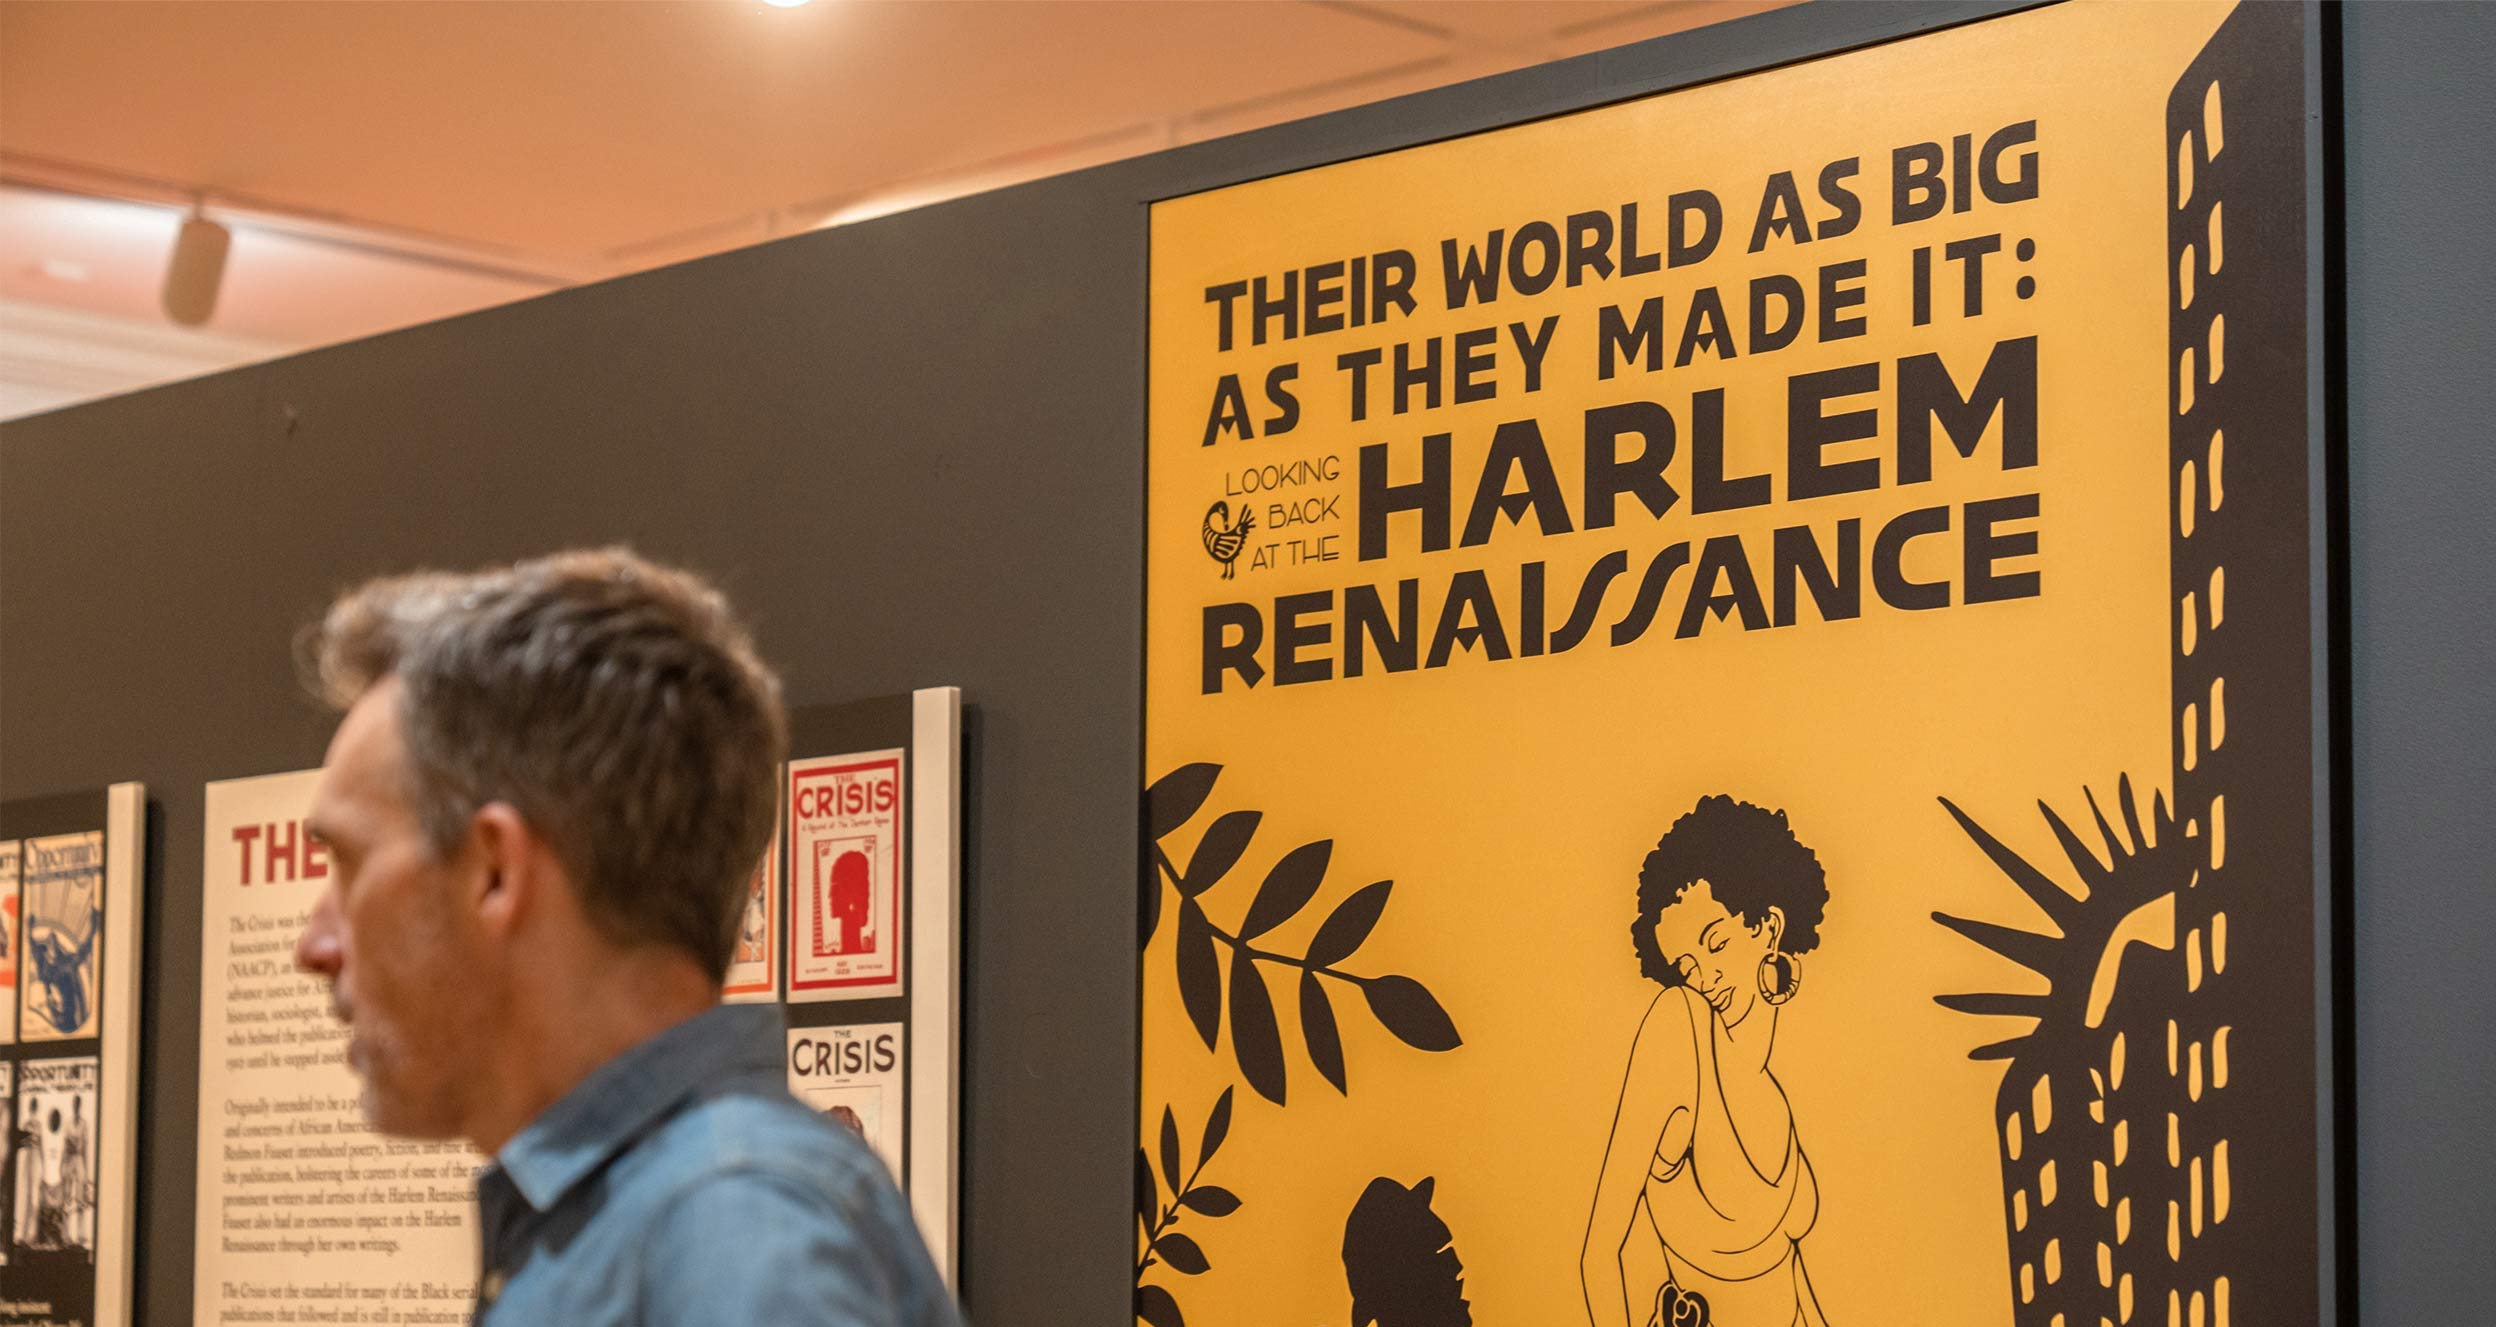 A man stands adjacent to a yellow sign with a woman on it that reads "Their World As Big As They Made It: Looking Back at the Harlem Renaissance."